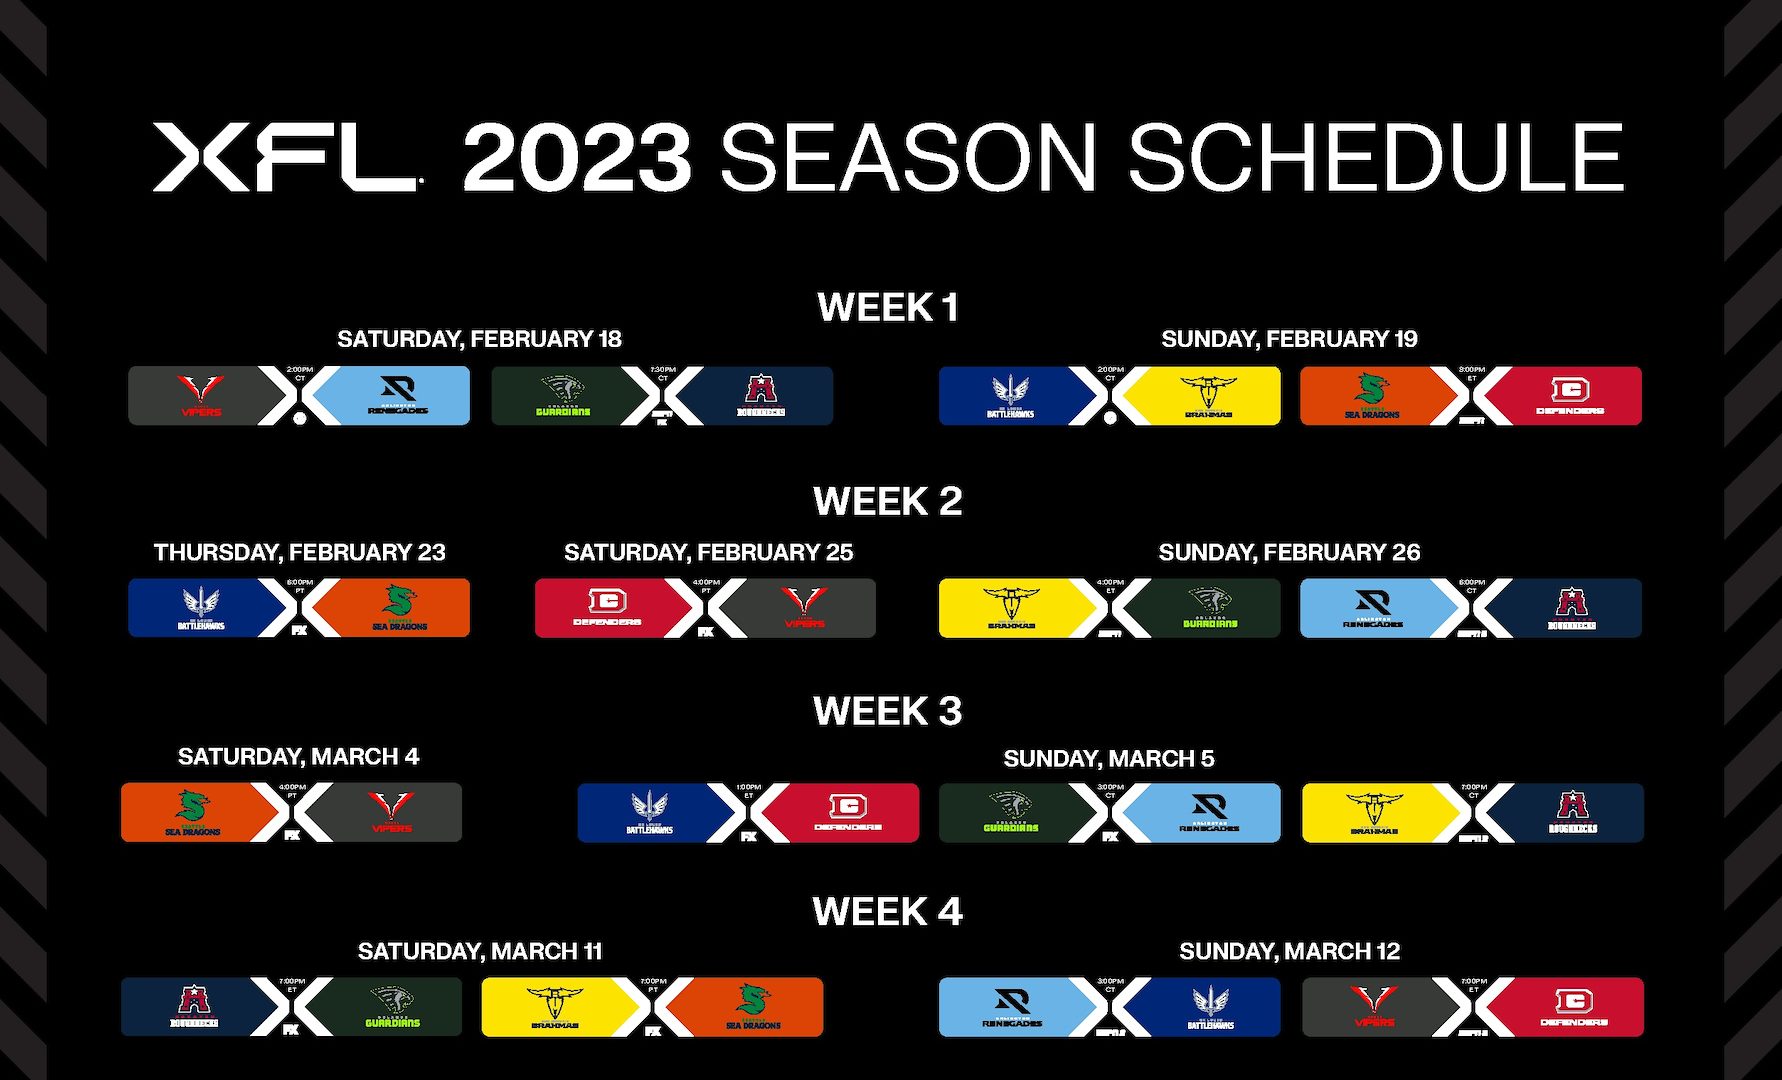 Quirks, oddities, and other things I noticed about the XFL schedule